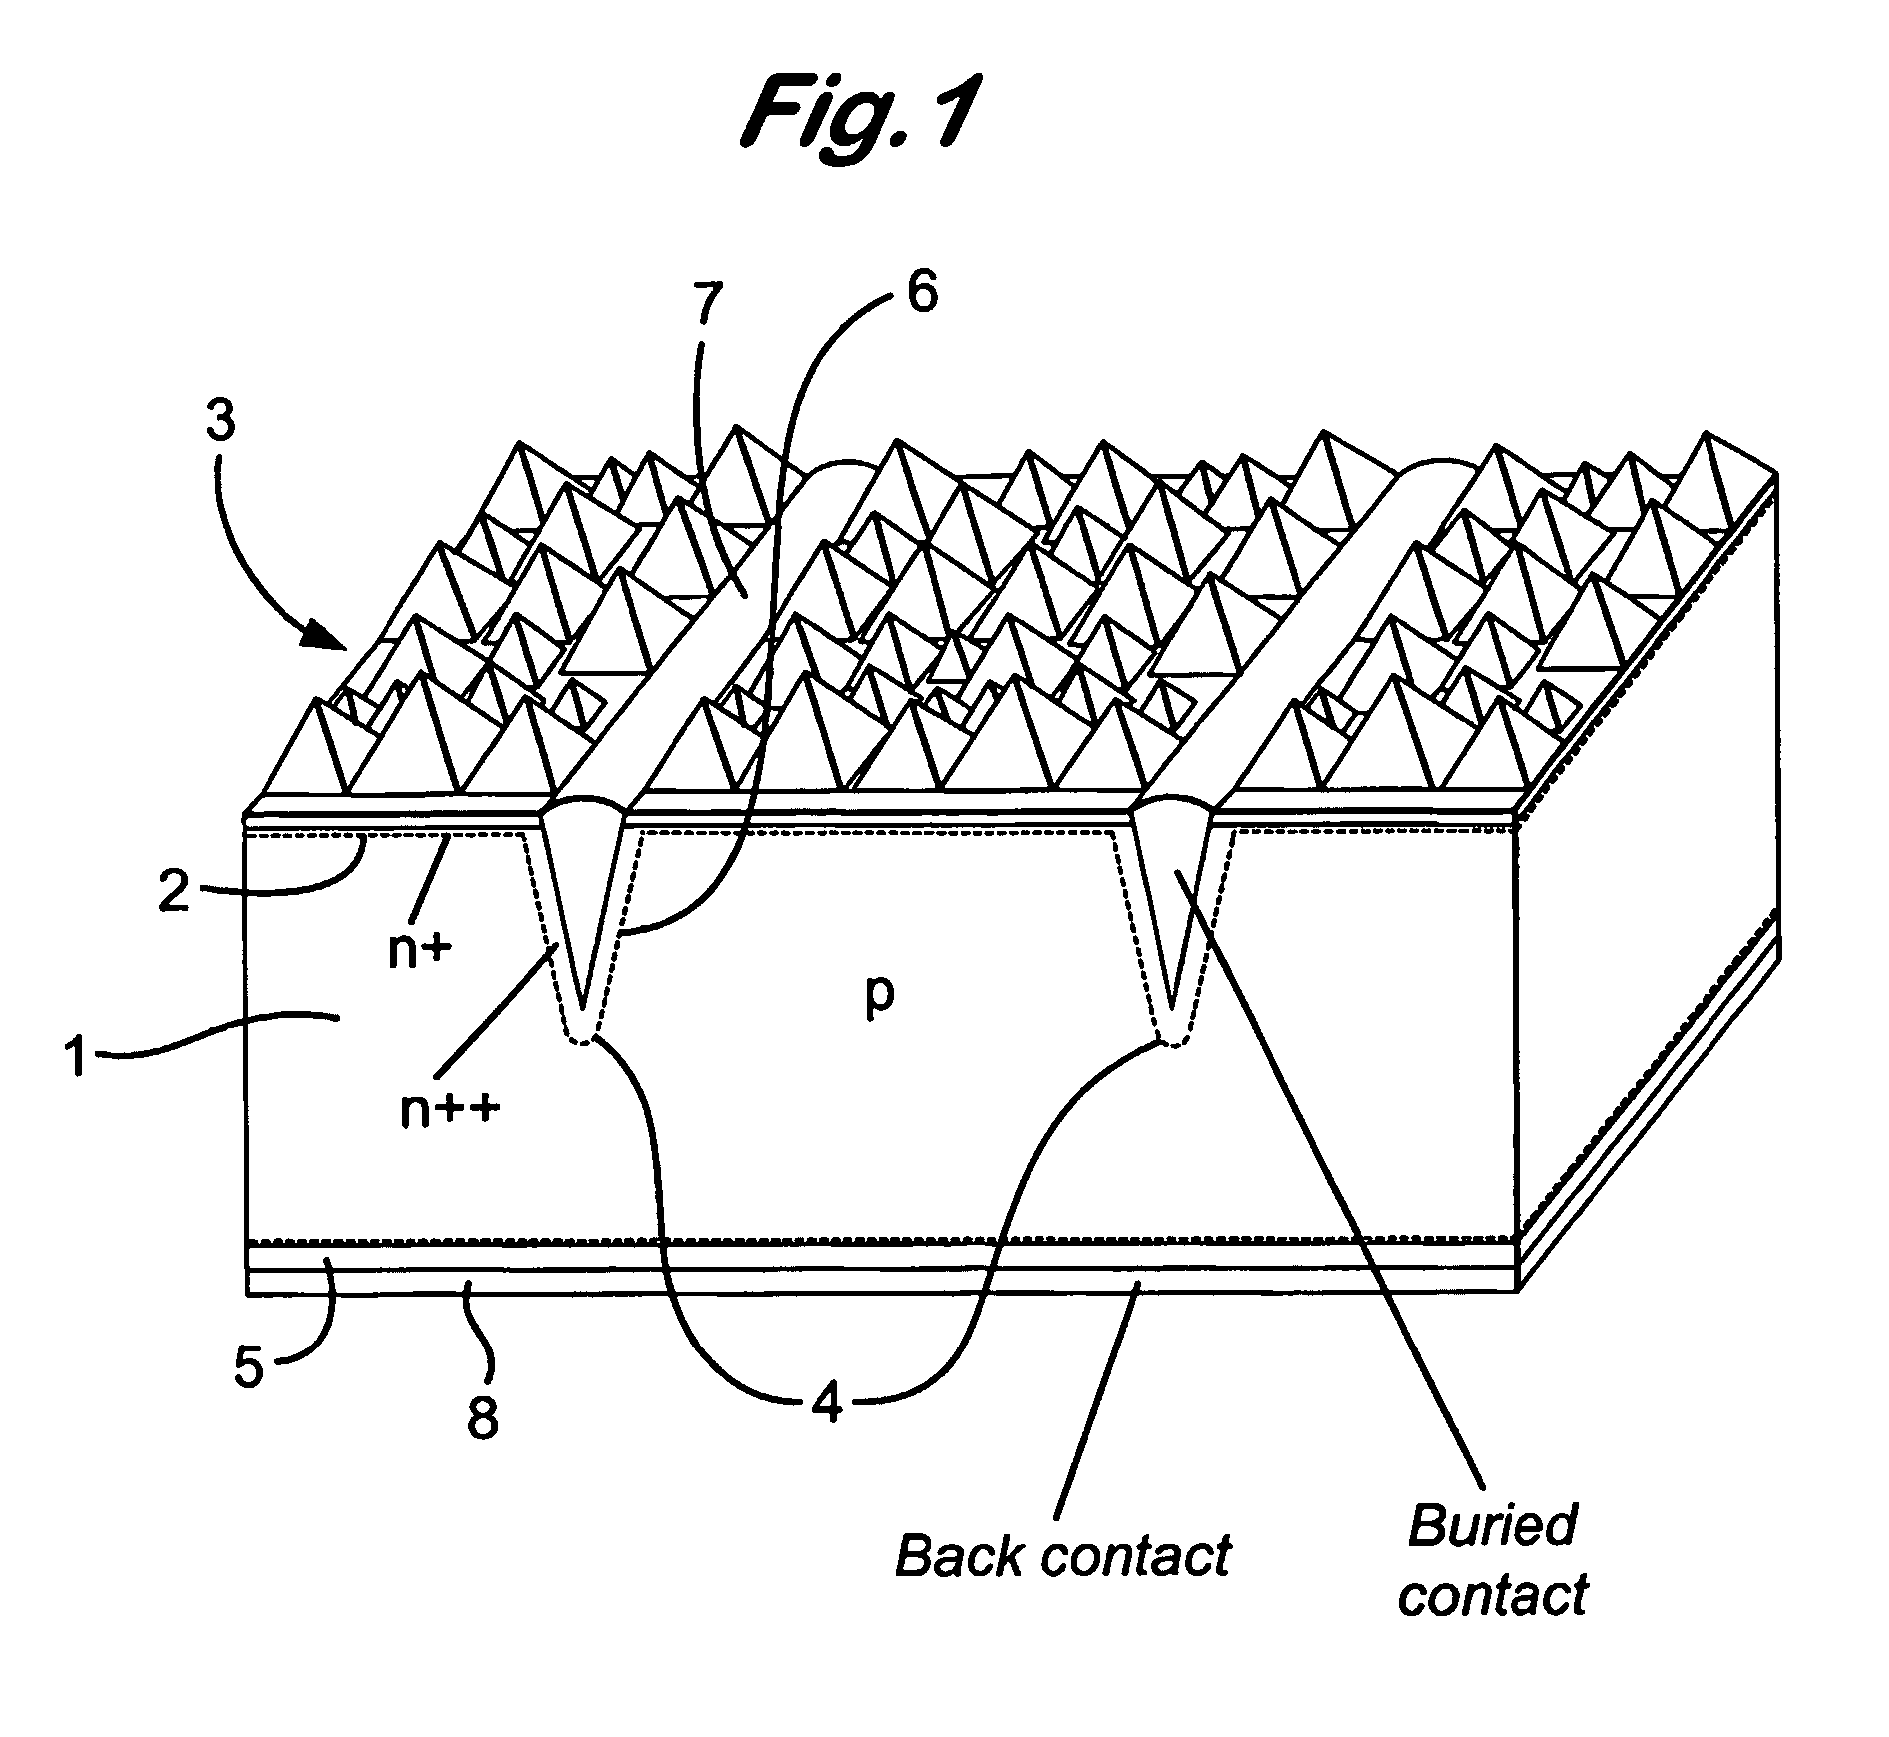 Process for manufacturing a solar cell